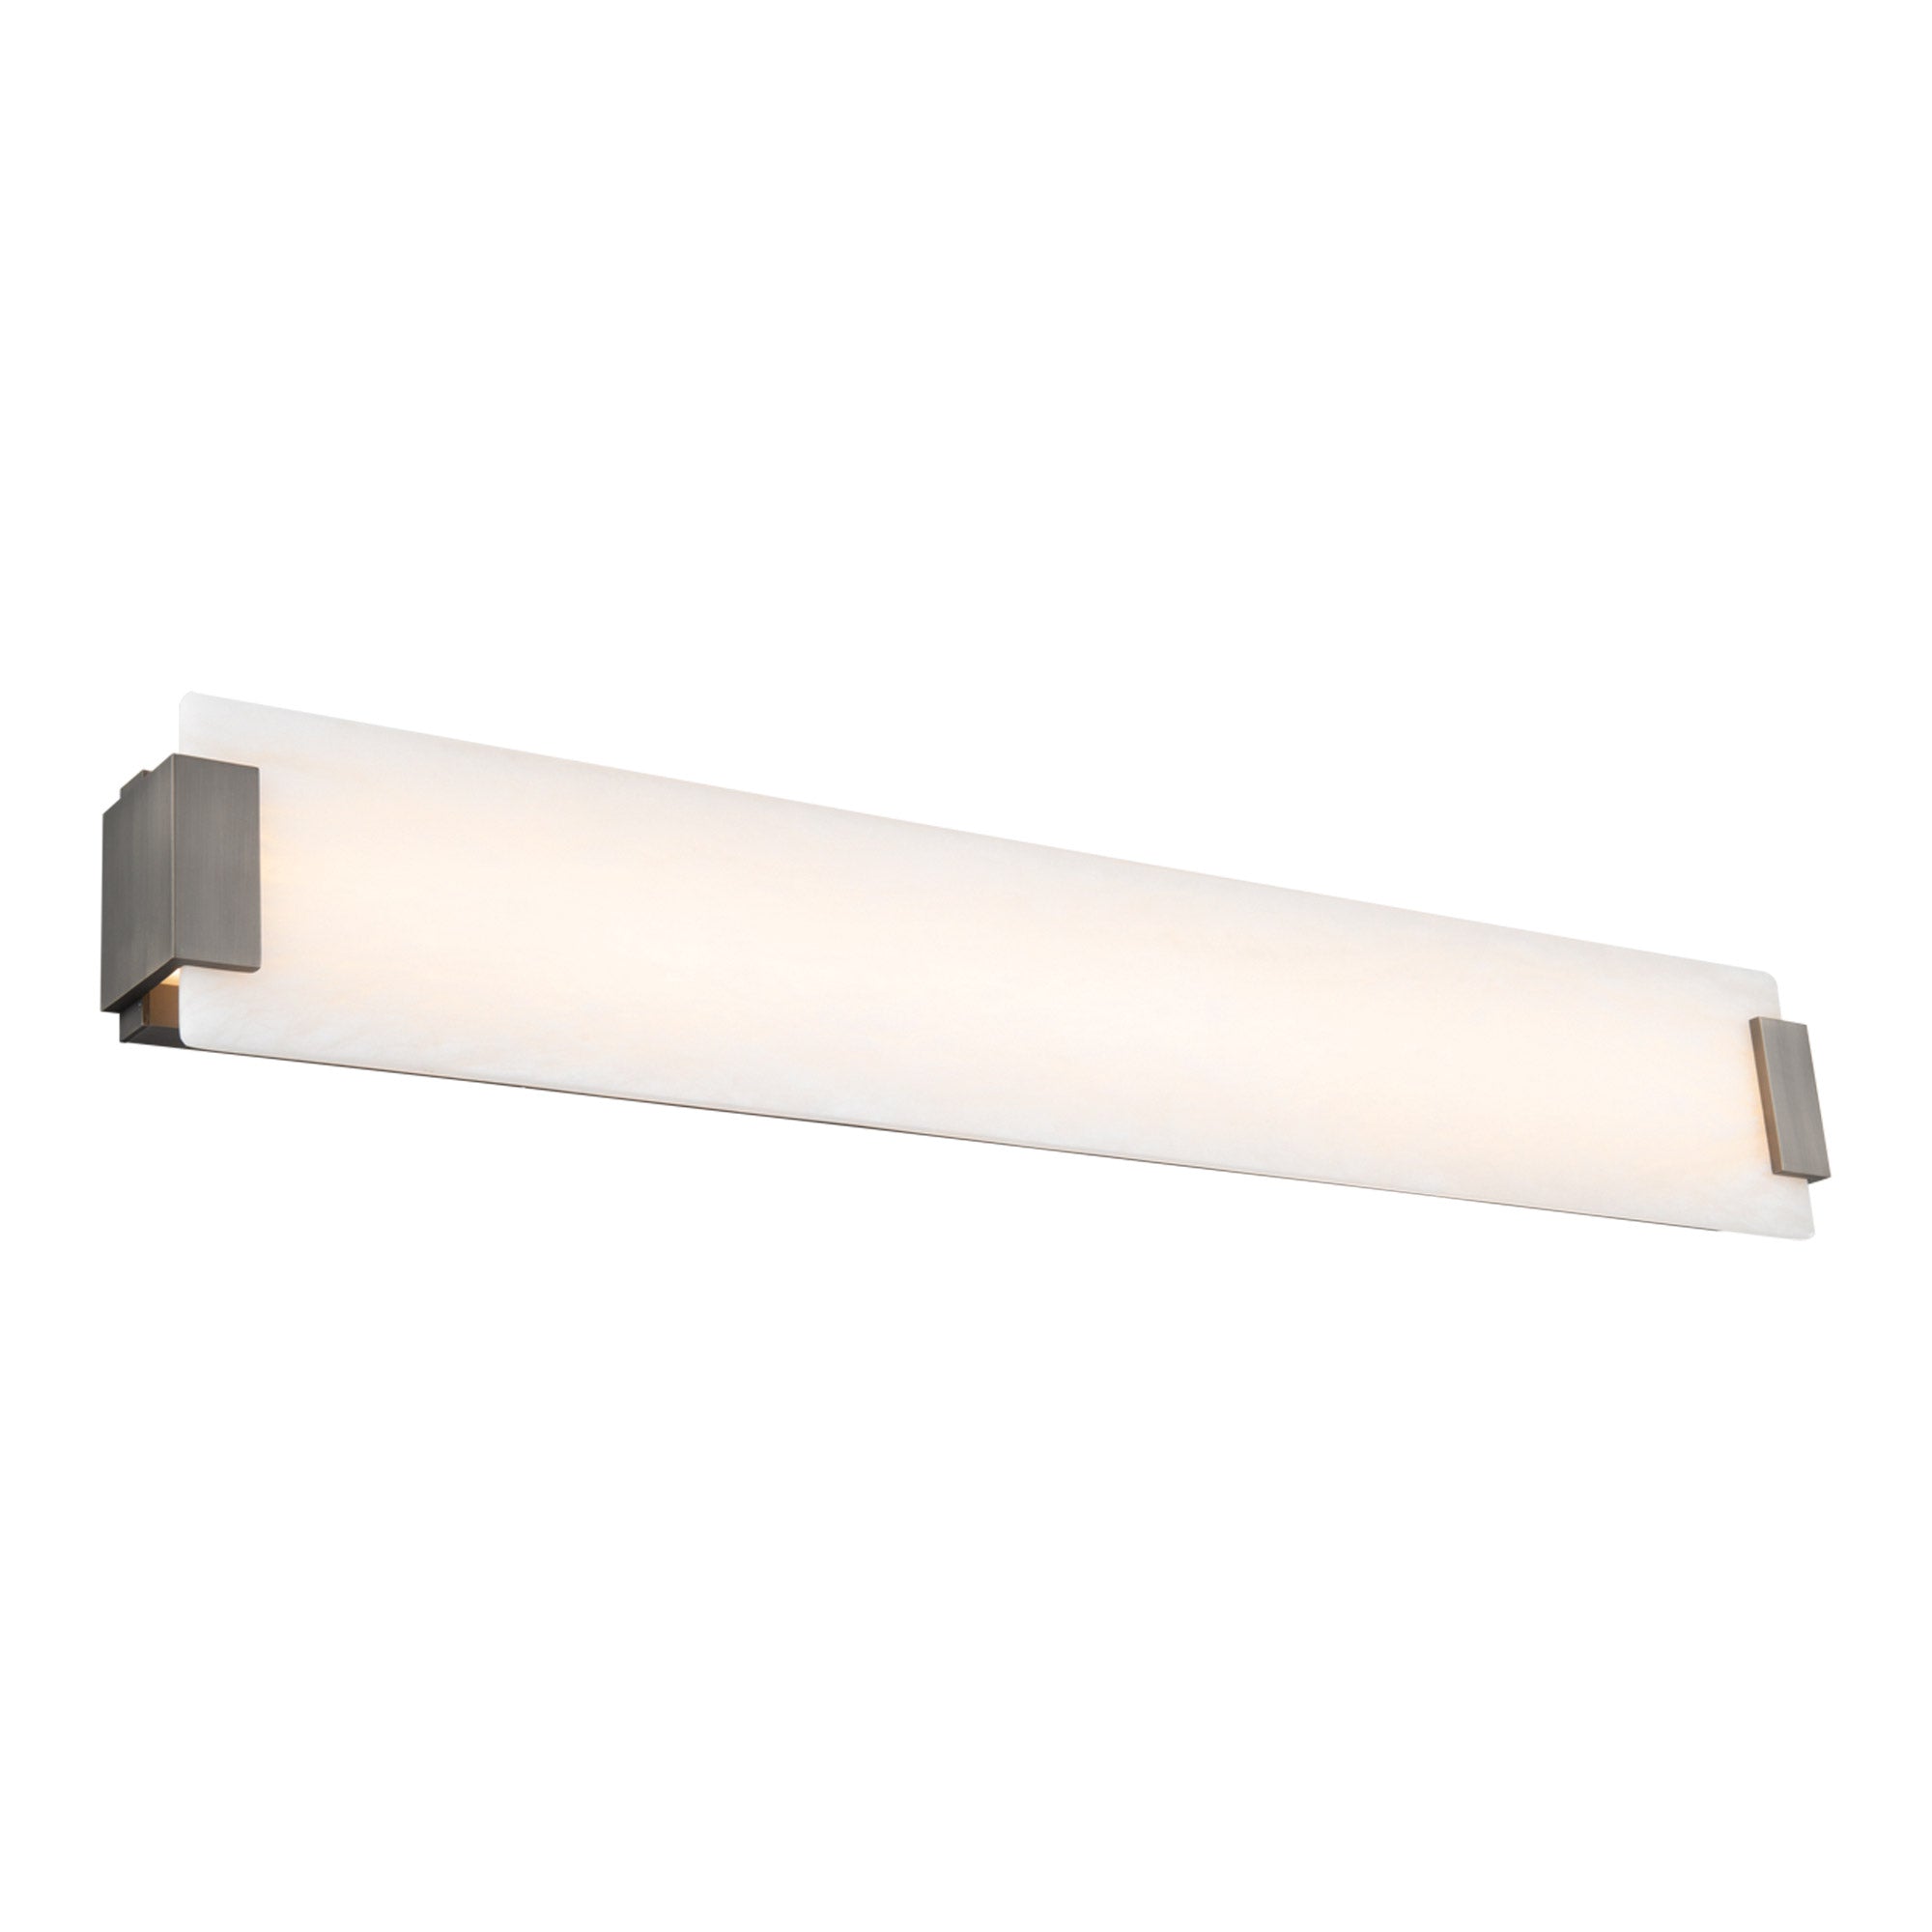 QUARRY Bathroom sconce Nickel INTEGRATED LED - WS-60038-BN | MODERN FORMS